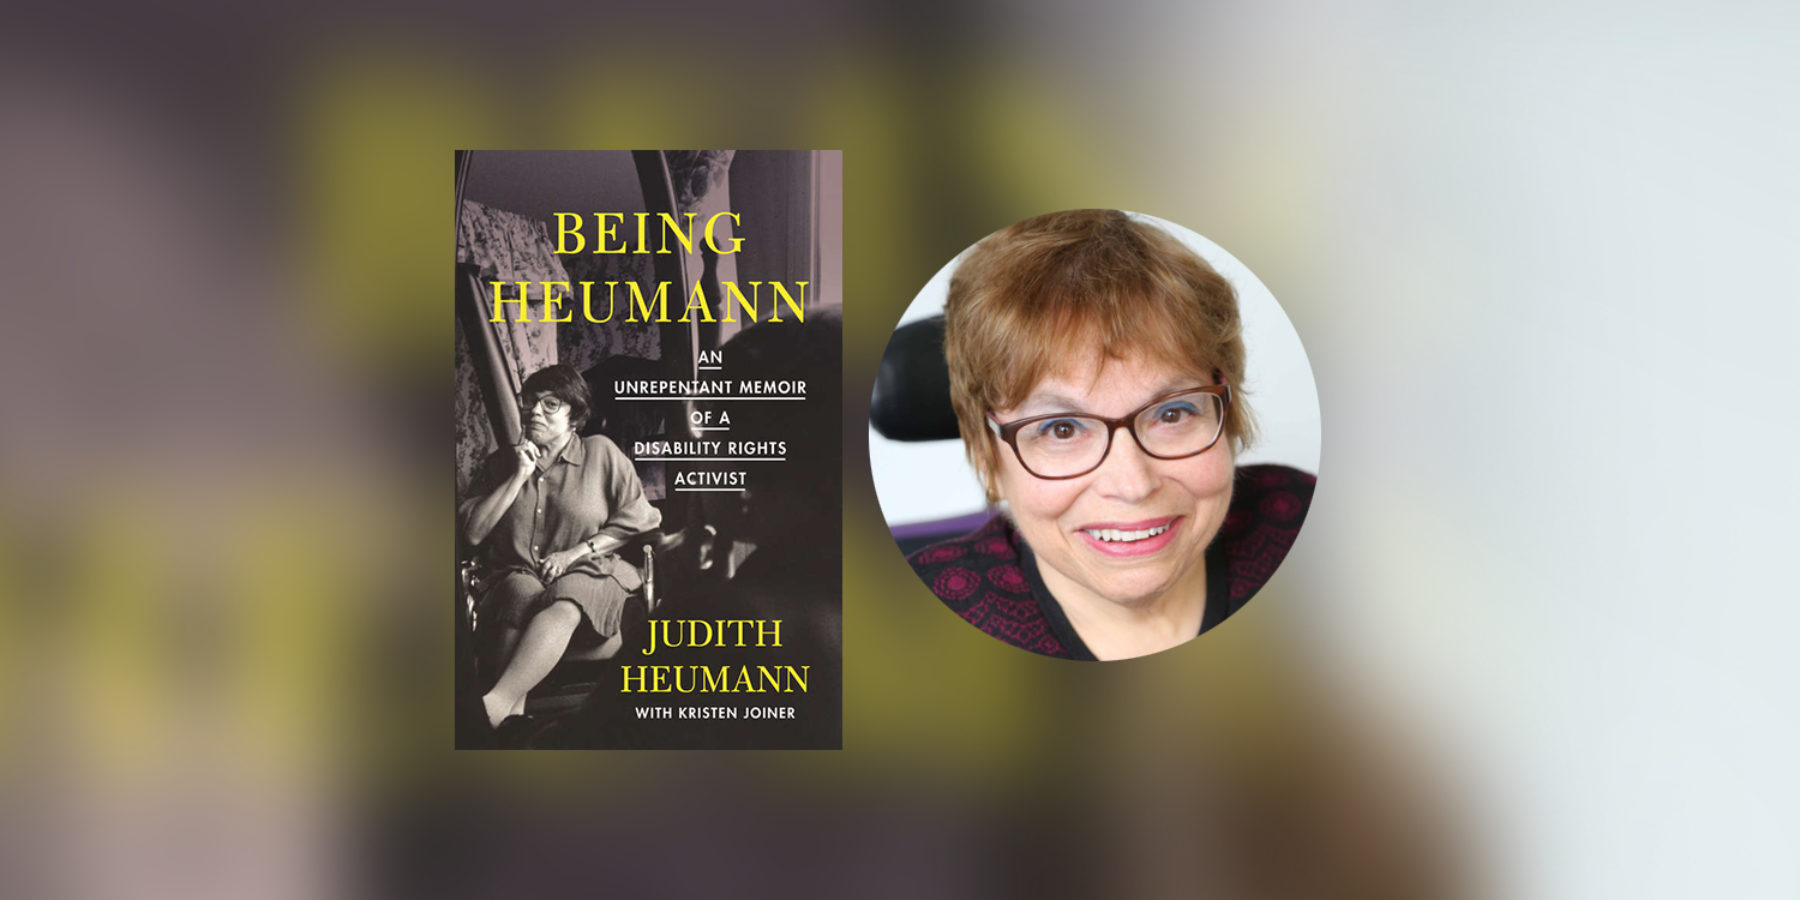 Judy Heumann Headshot superimposed with her book cover